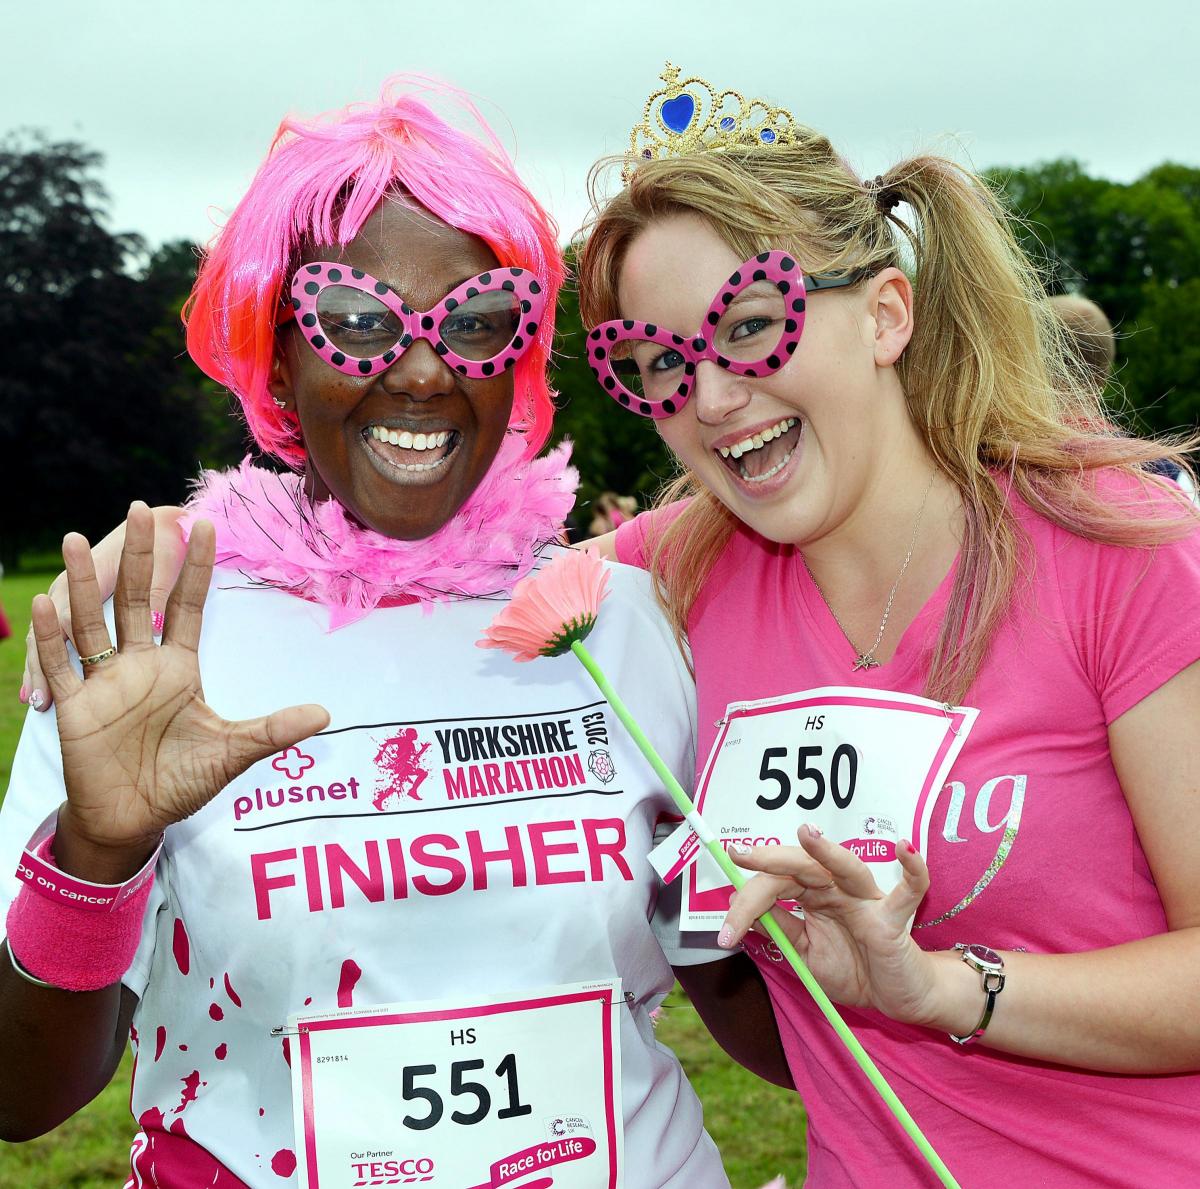 Ilkley Race for Life 2014